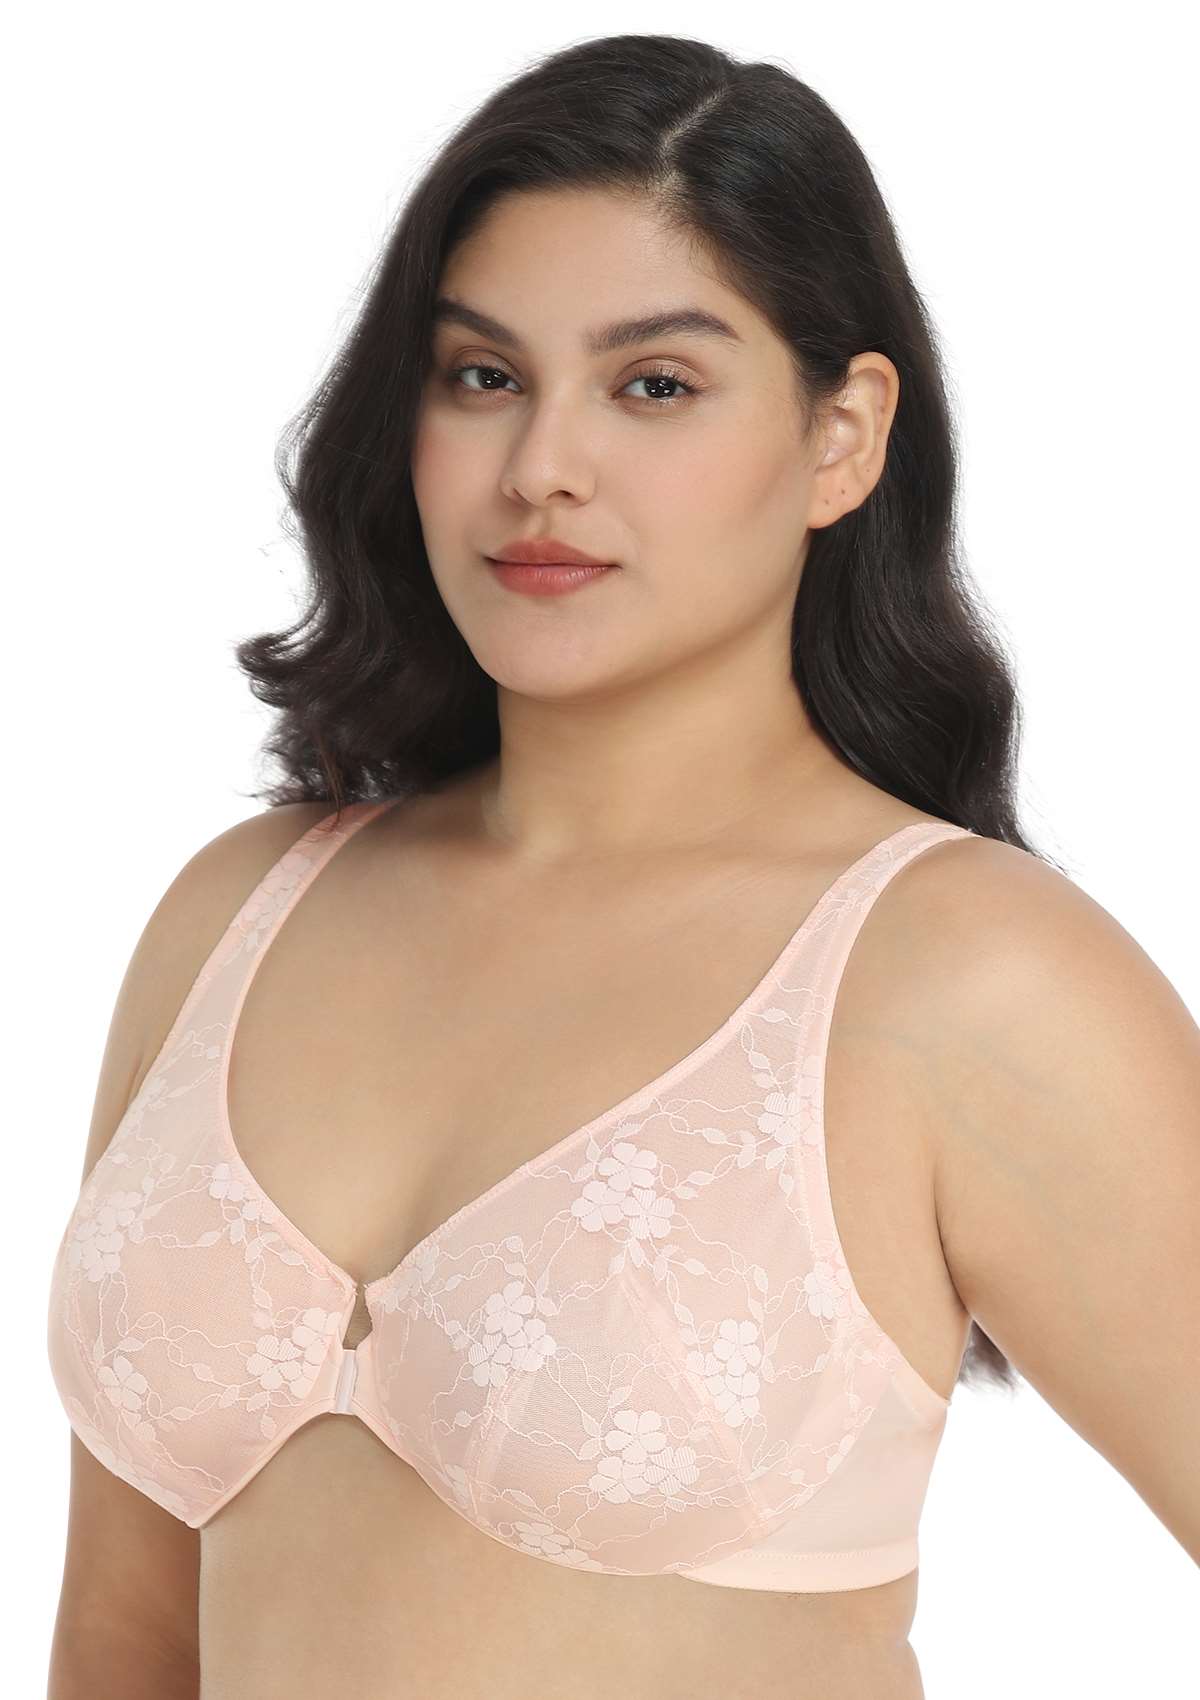 HSIA Spring Romance Front-Close Floral Lace Unlined Full Coverage Bra - White / 34 / DDD/F